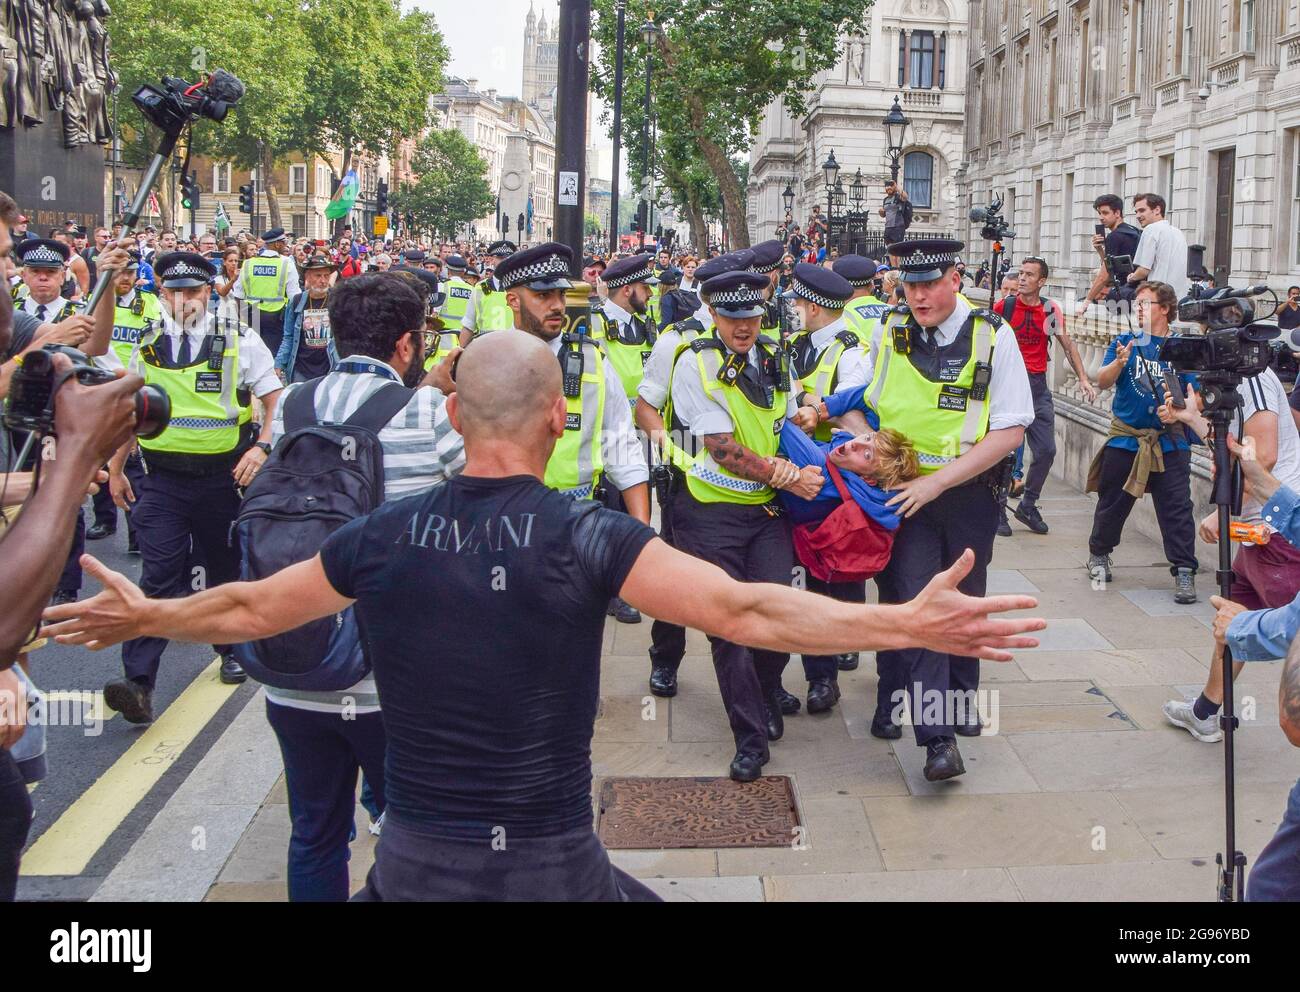 London, United Kingdom. 24th July 2021. Police arrest a protester in Whitehall. Thousands of protesters gathered in Westminster to protest against COVID-19 vaccinations, vaccine passports, and coronavirus restrictions, with many demonstrators calling the pandemic a 'hoax'. (Credit: Vuk Valcic / Alamy Live News) Stock Photo